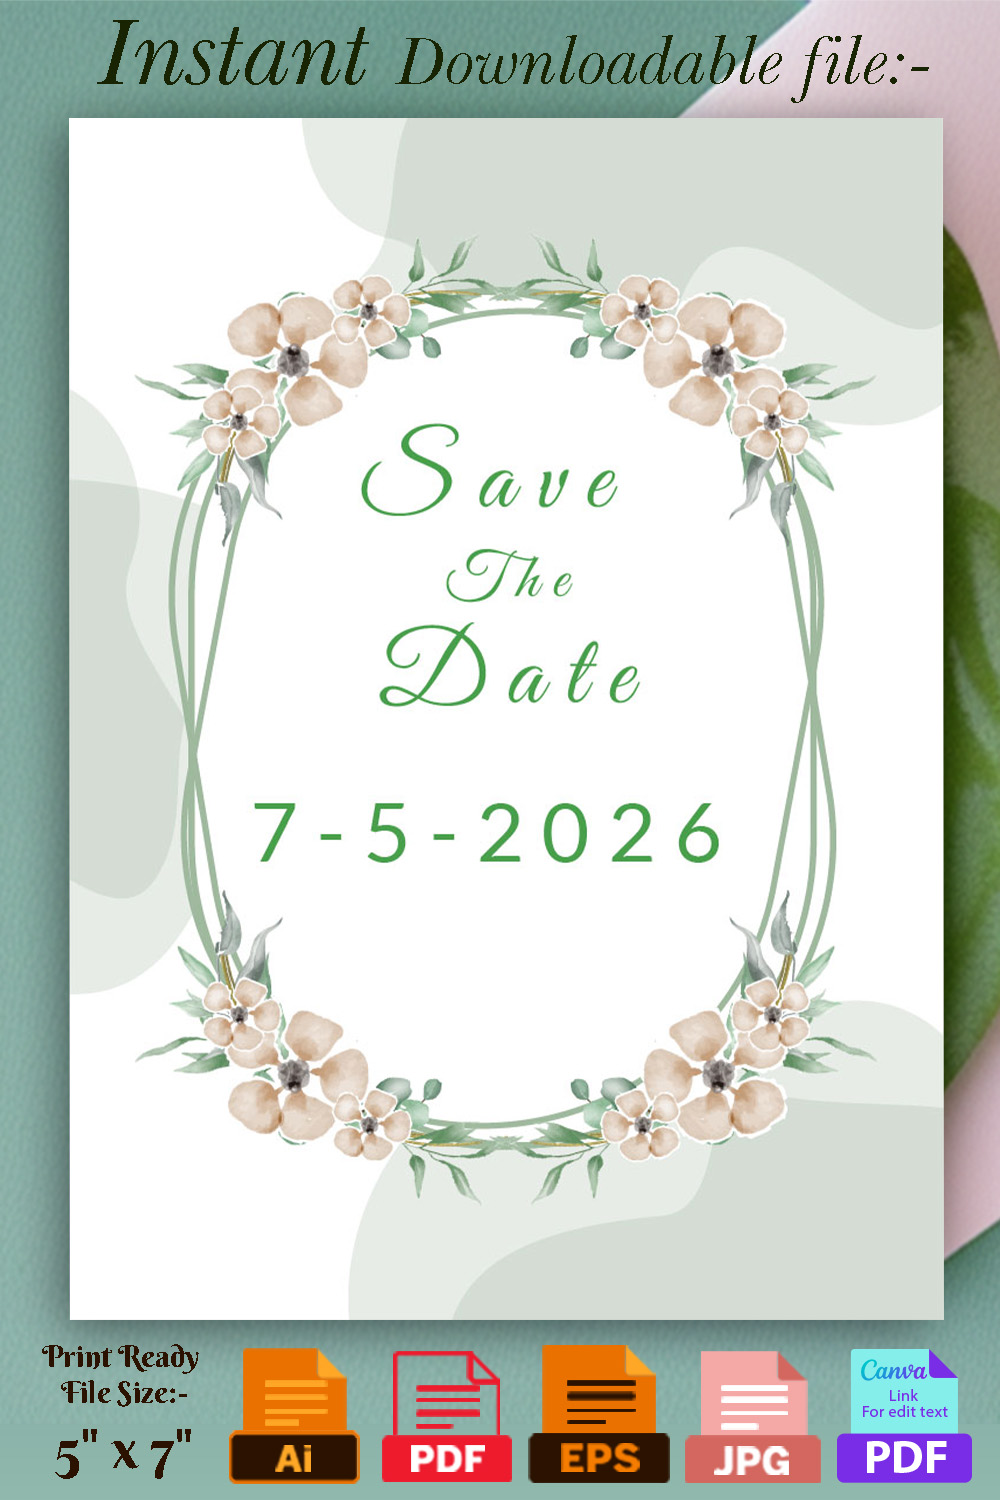 Image with gorgeous wedding invitation in light green colors.